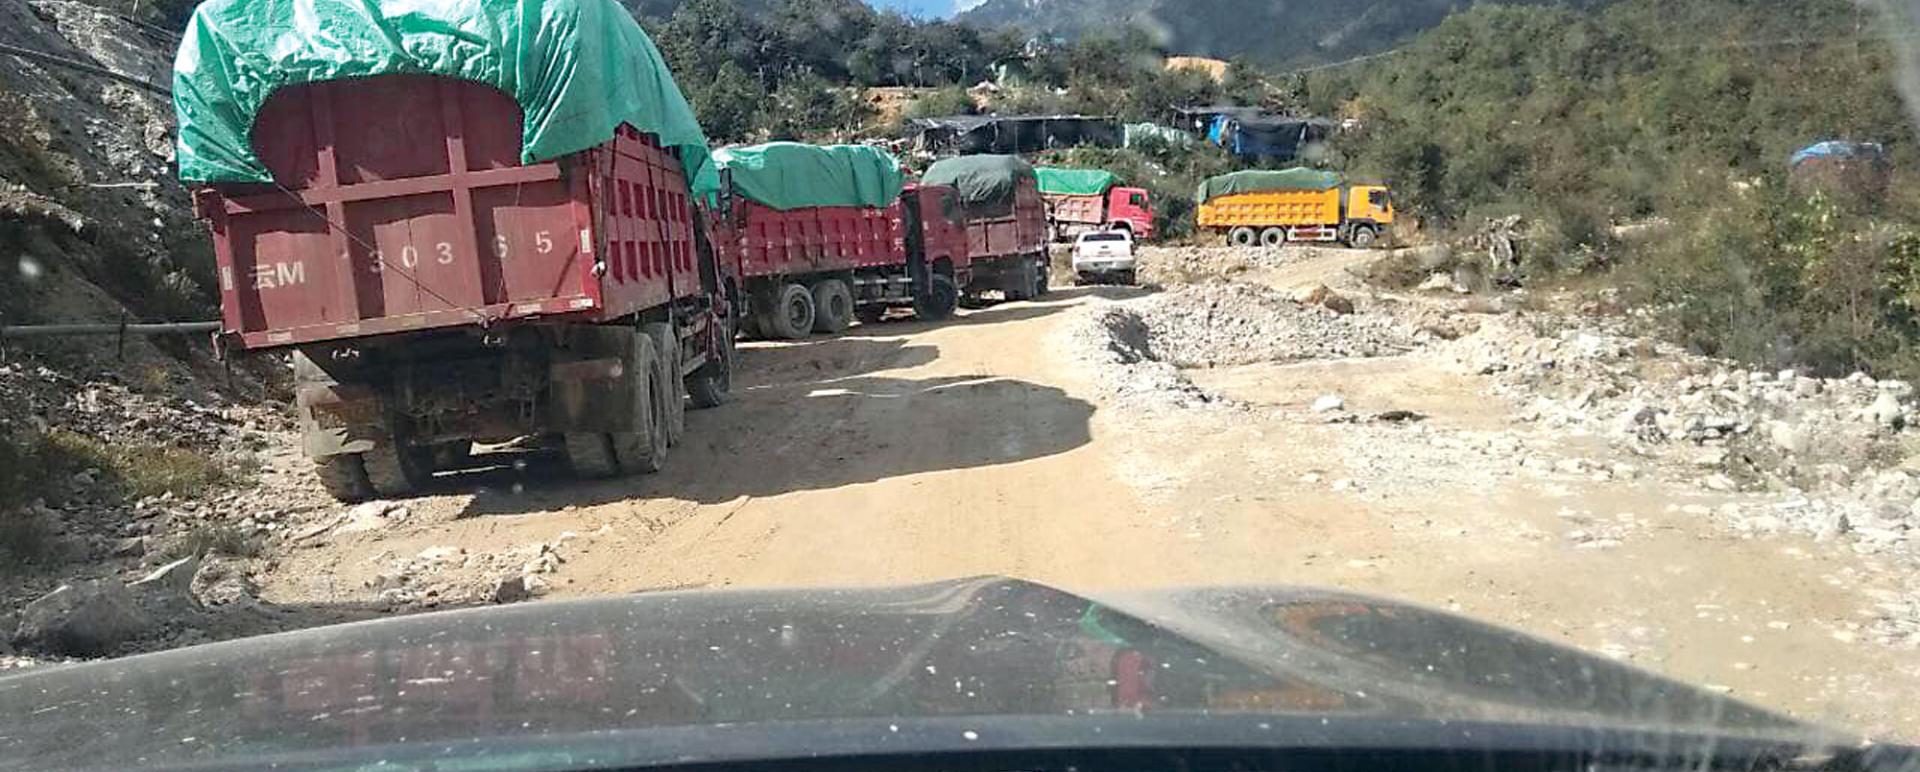 A convoy of trucks loaded with Ammonium Sulphate.(Photo-Mines Department in Kachin State)